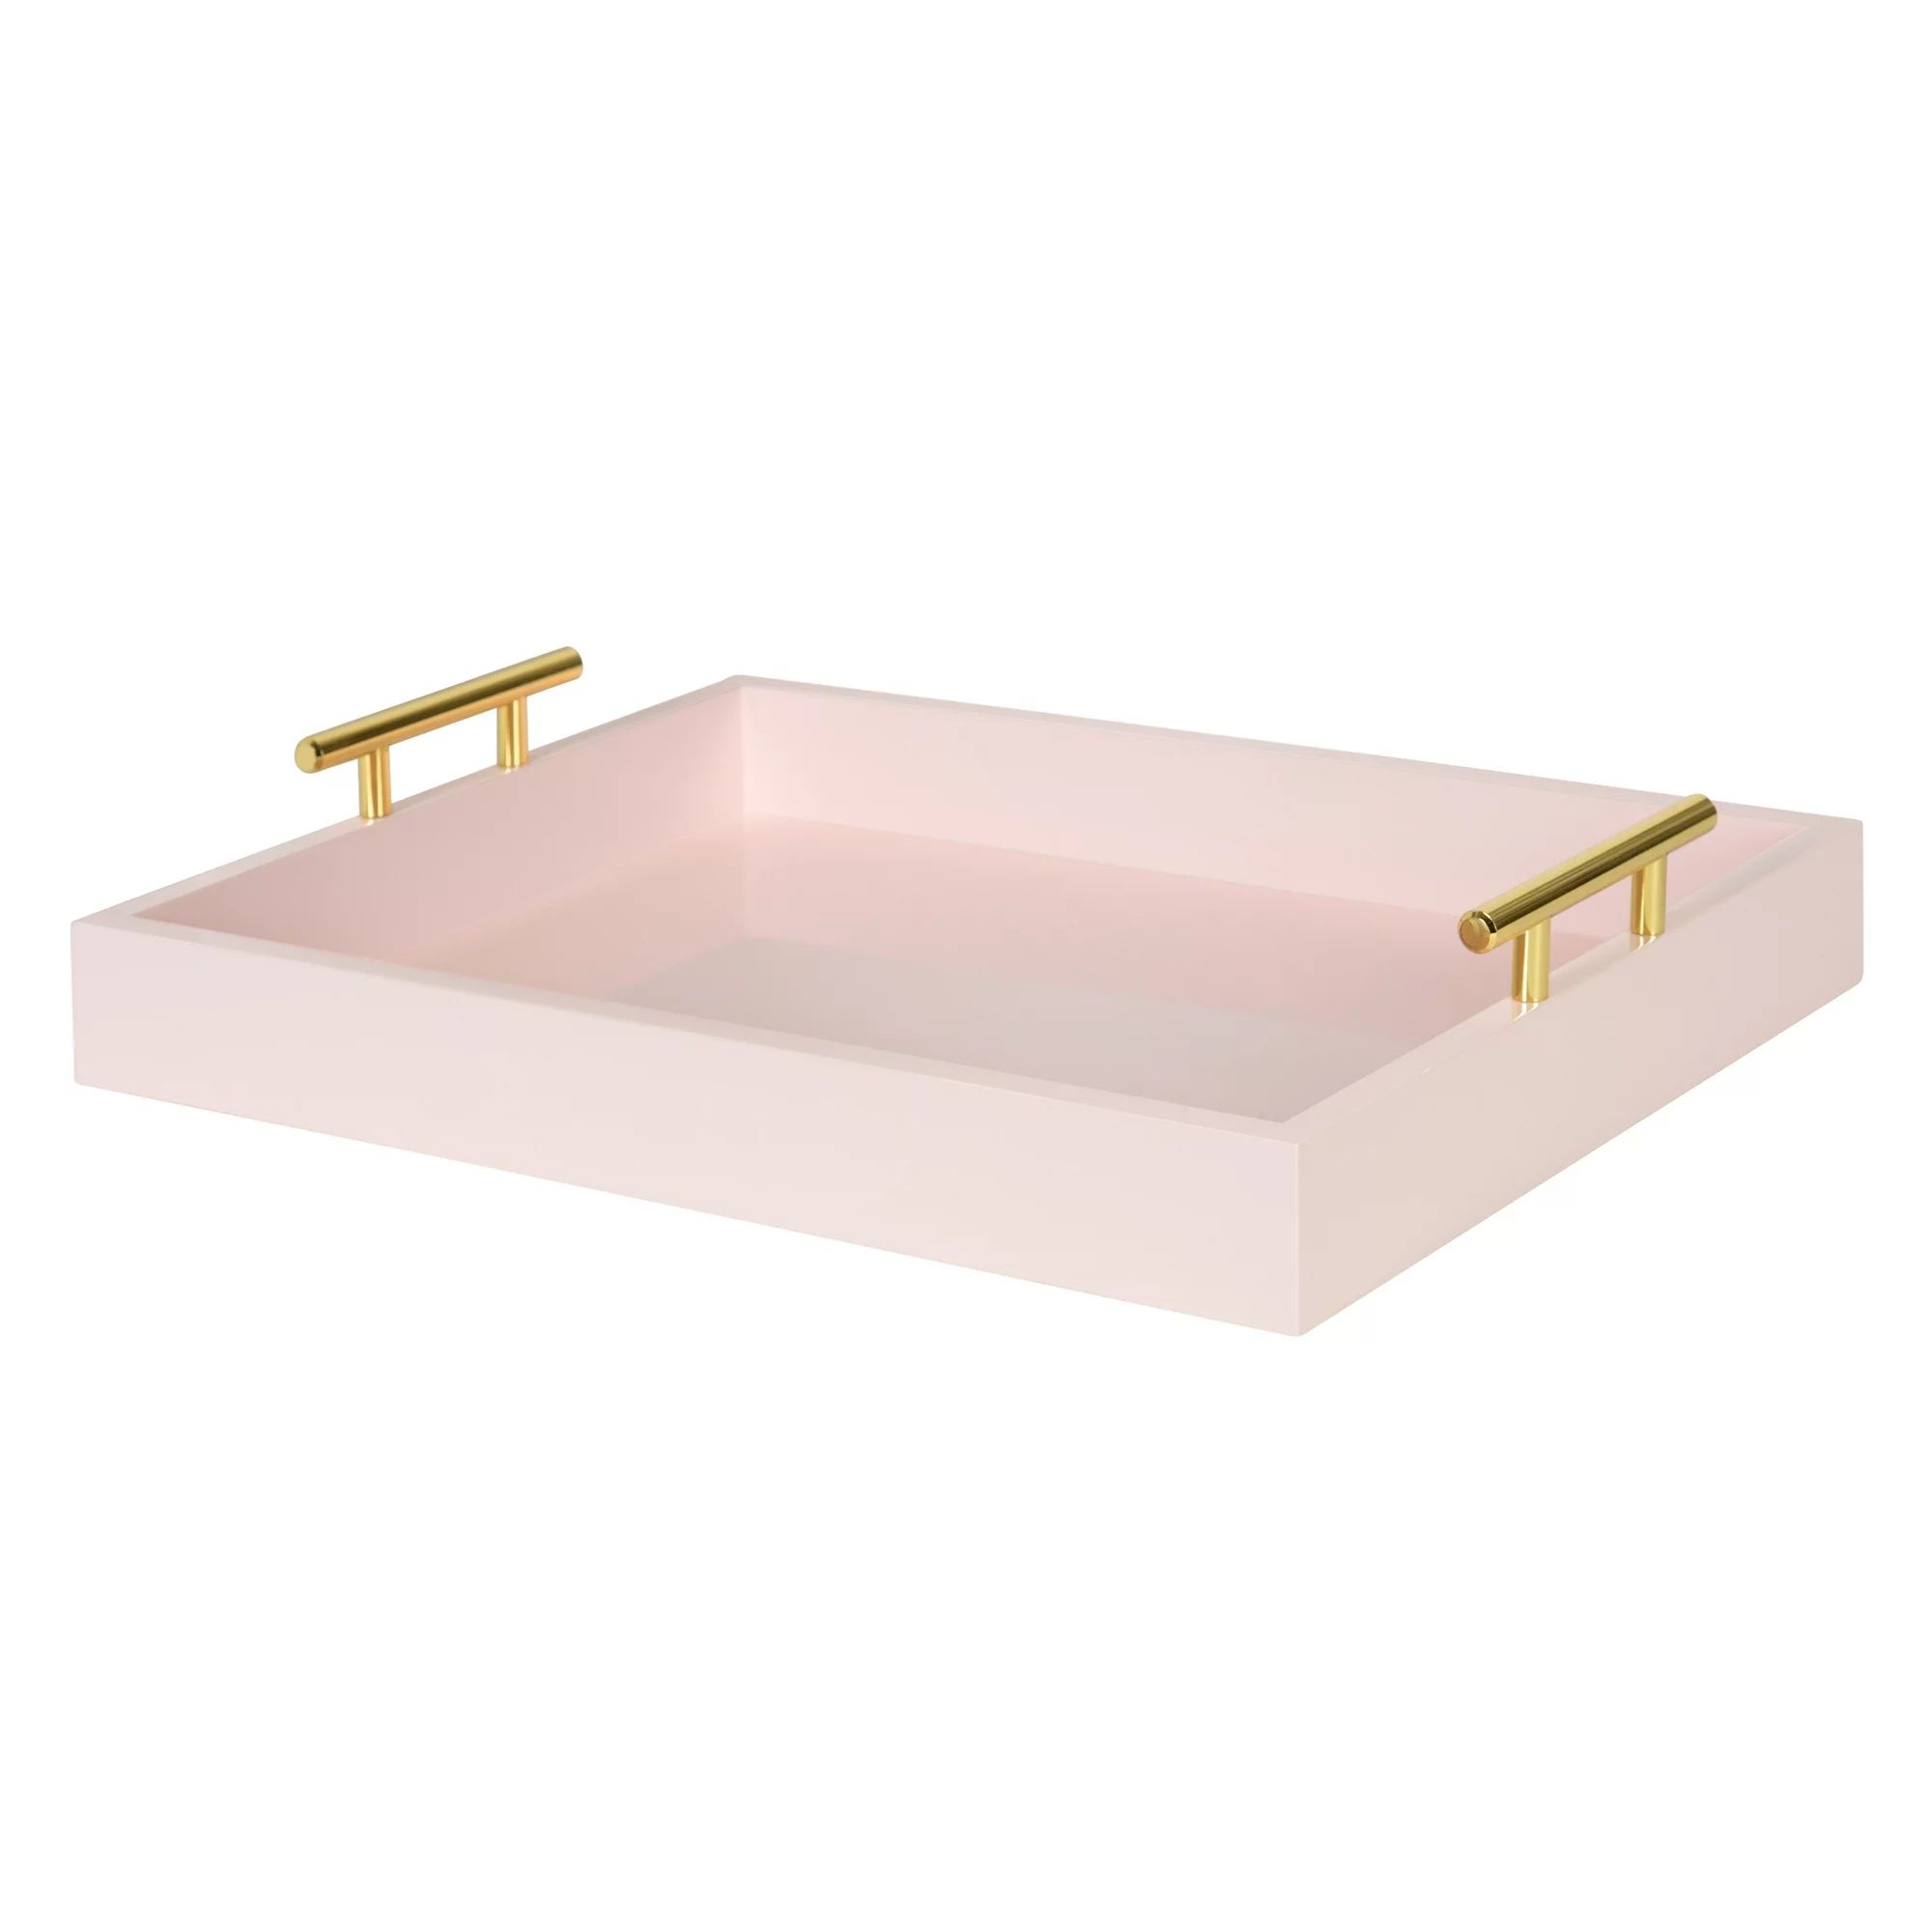 Kate and Laurel - Lipton Decorative Tray with Polished Gold Metal Handles, Soft Pink | Walmart (US)